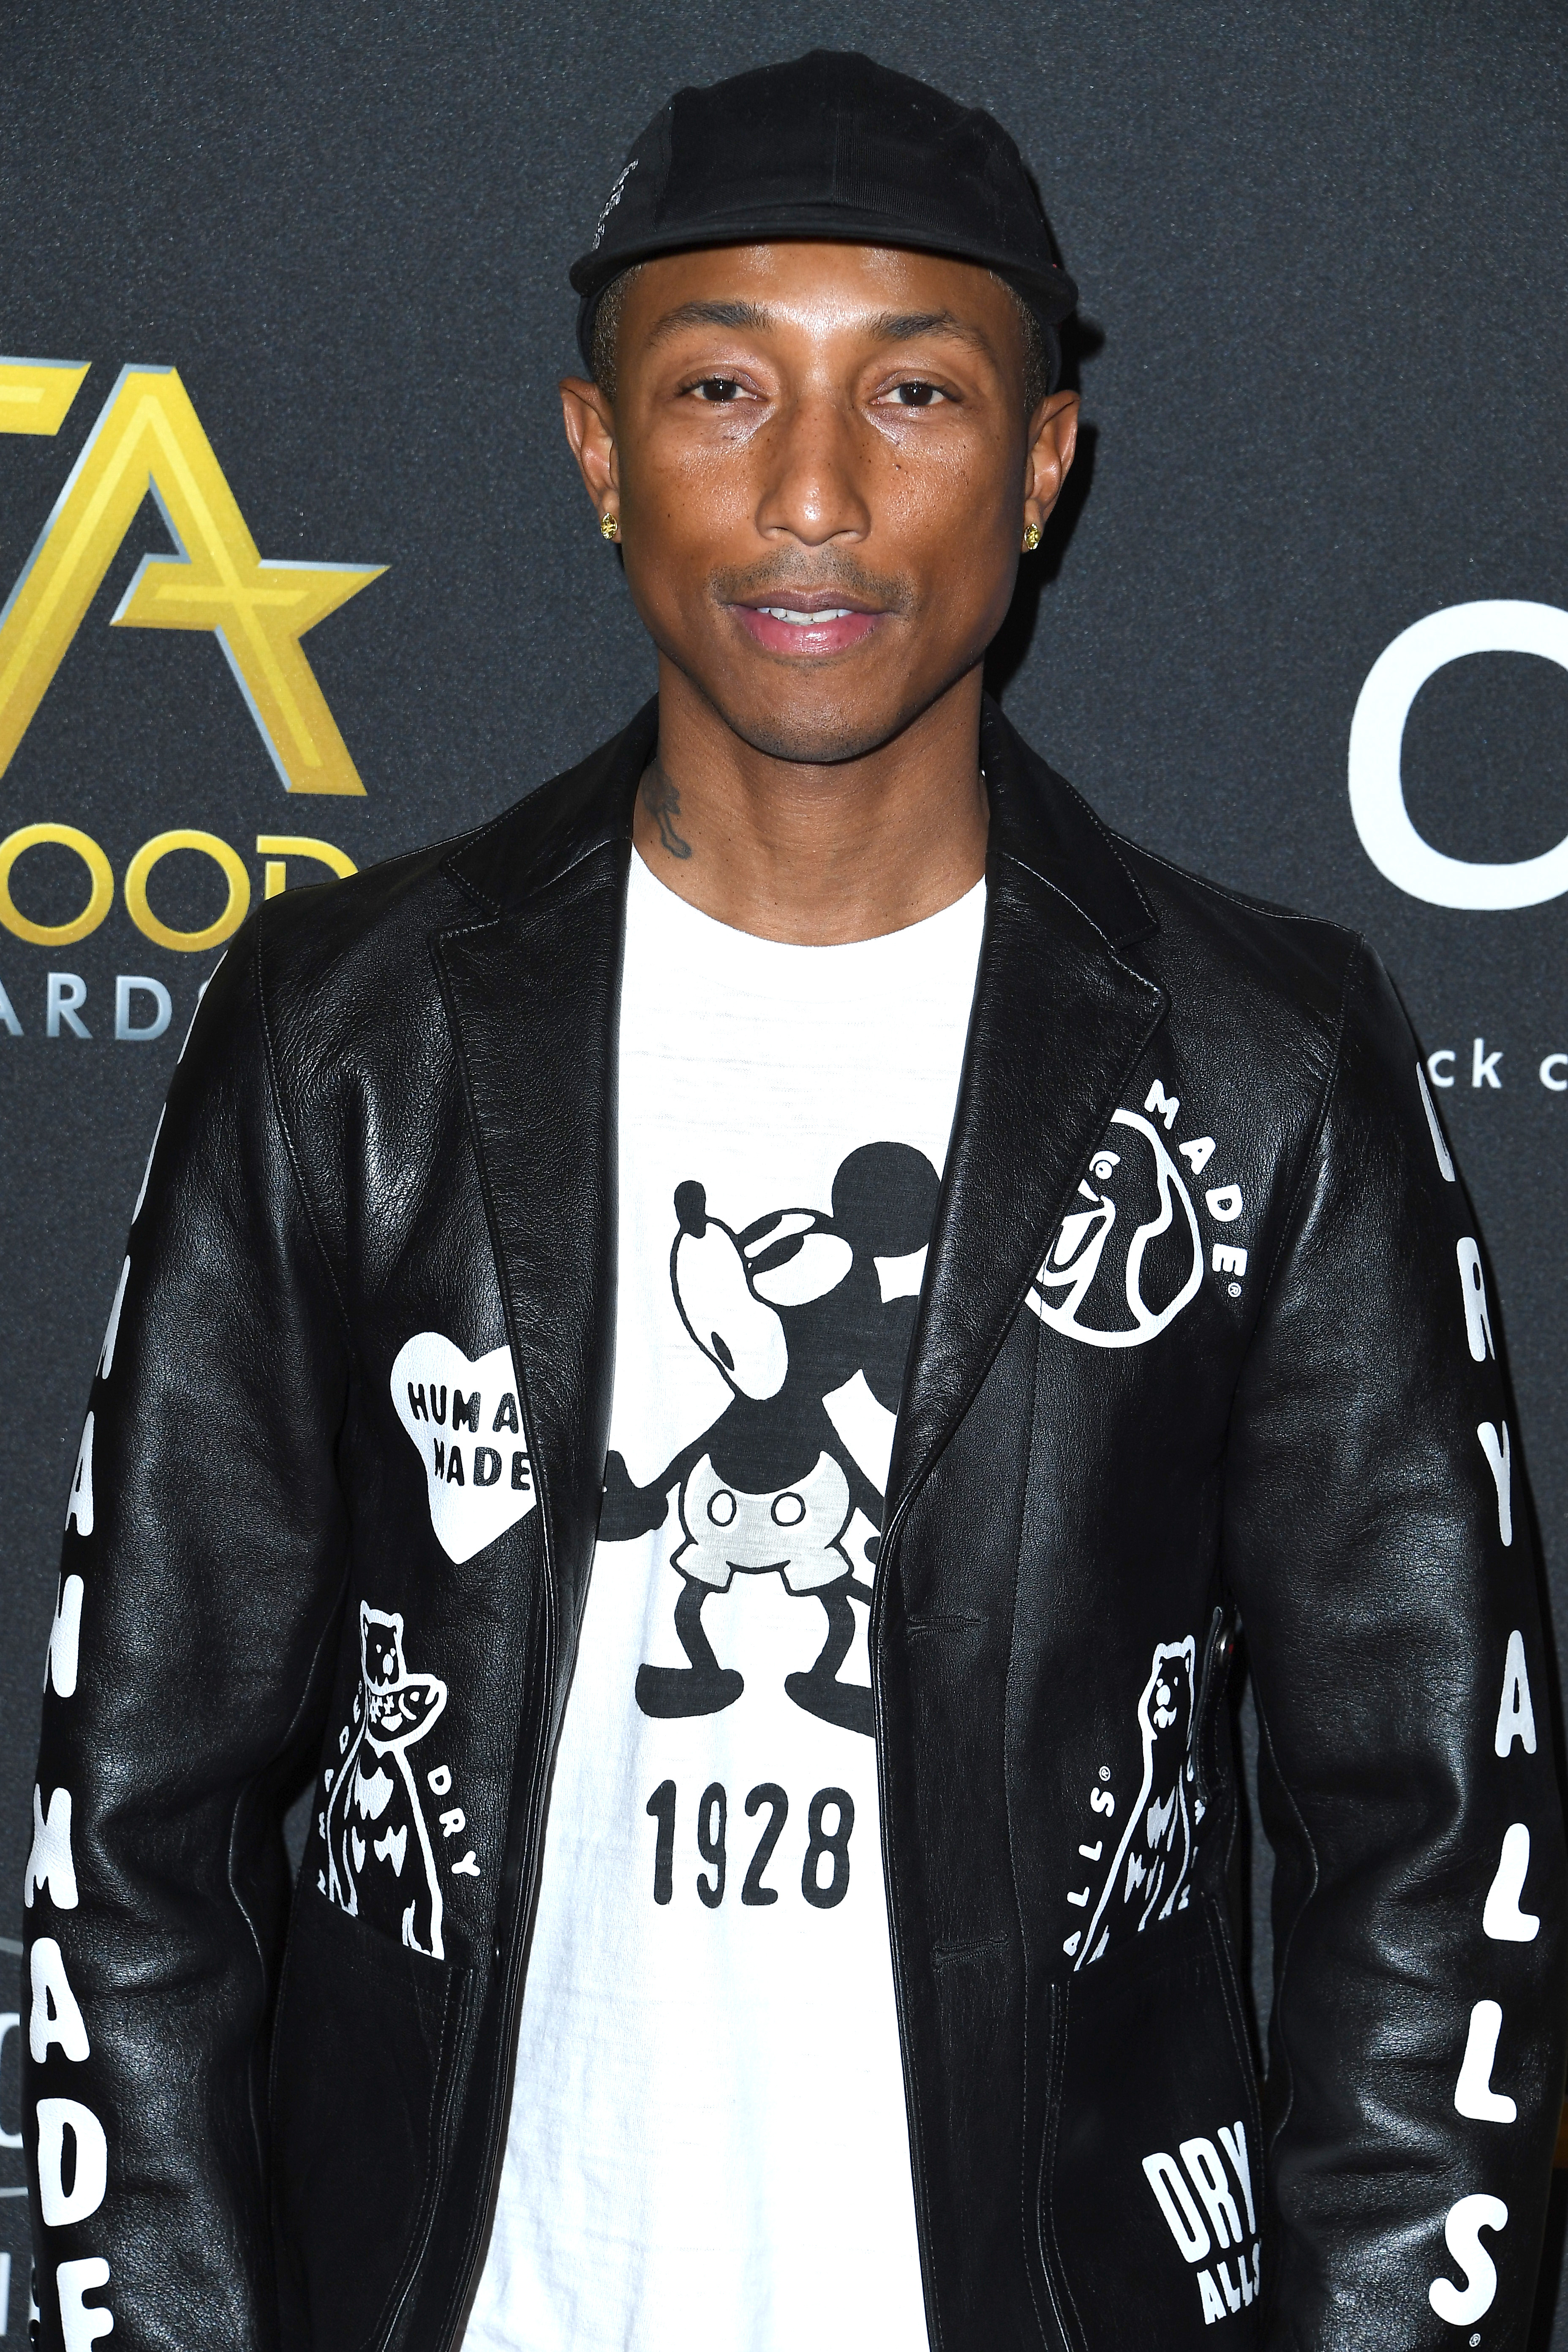 Pharrell Williams in a leather jacket with graphic designs, a tee with Mickey Mouse, and a black hat at an awards event